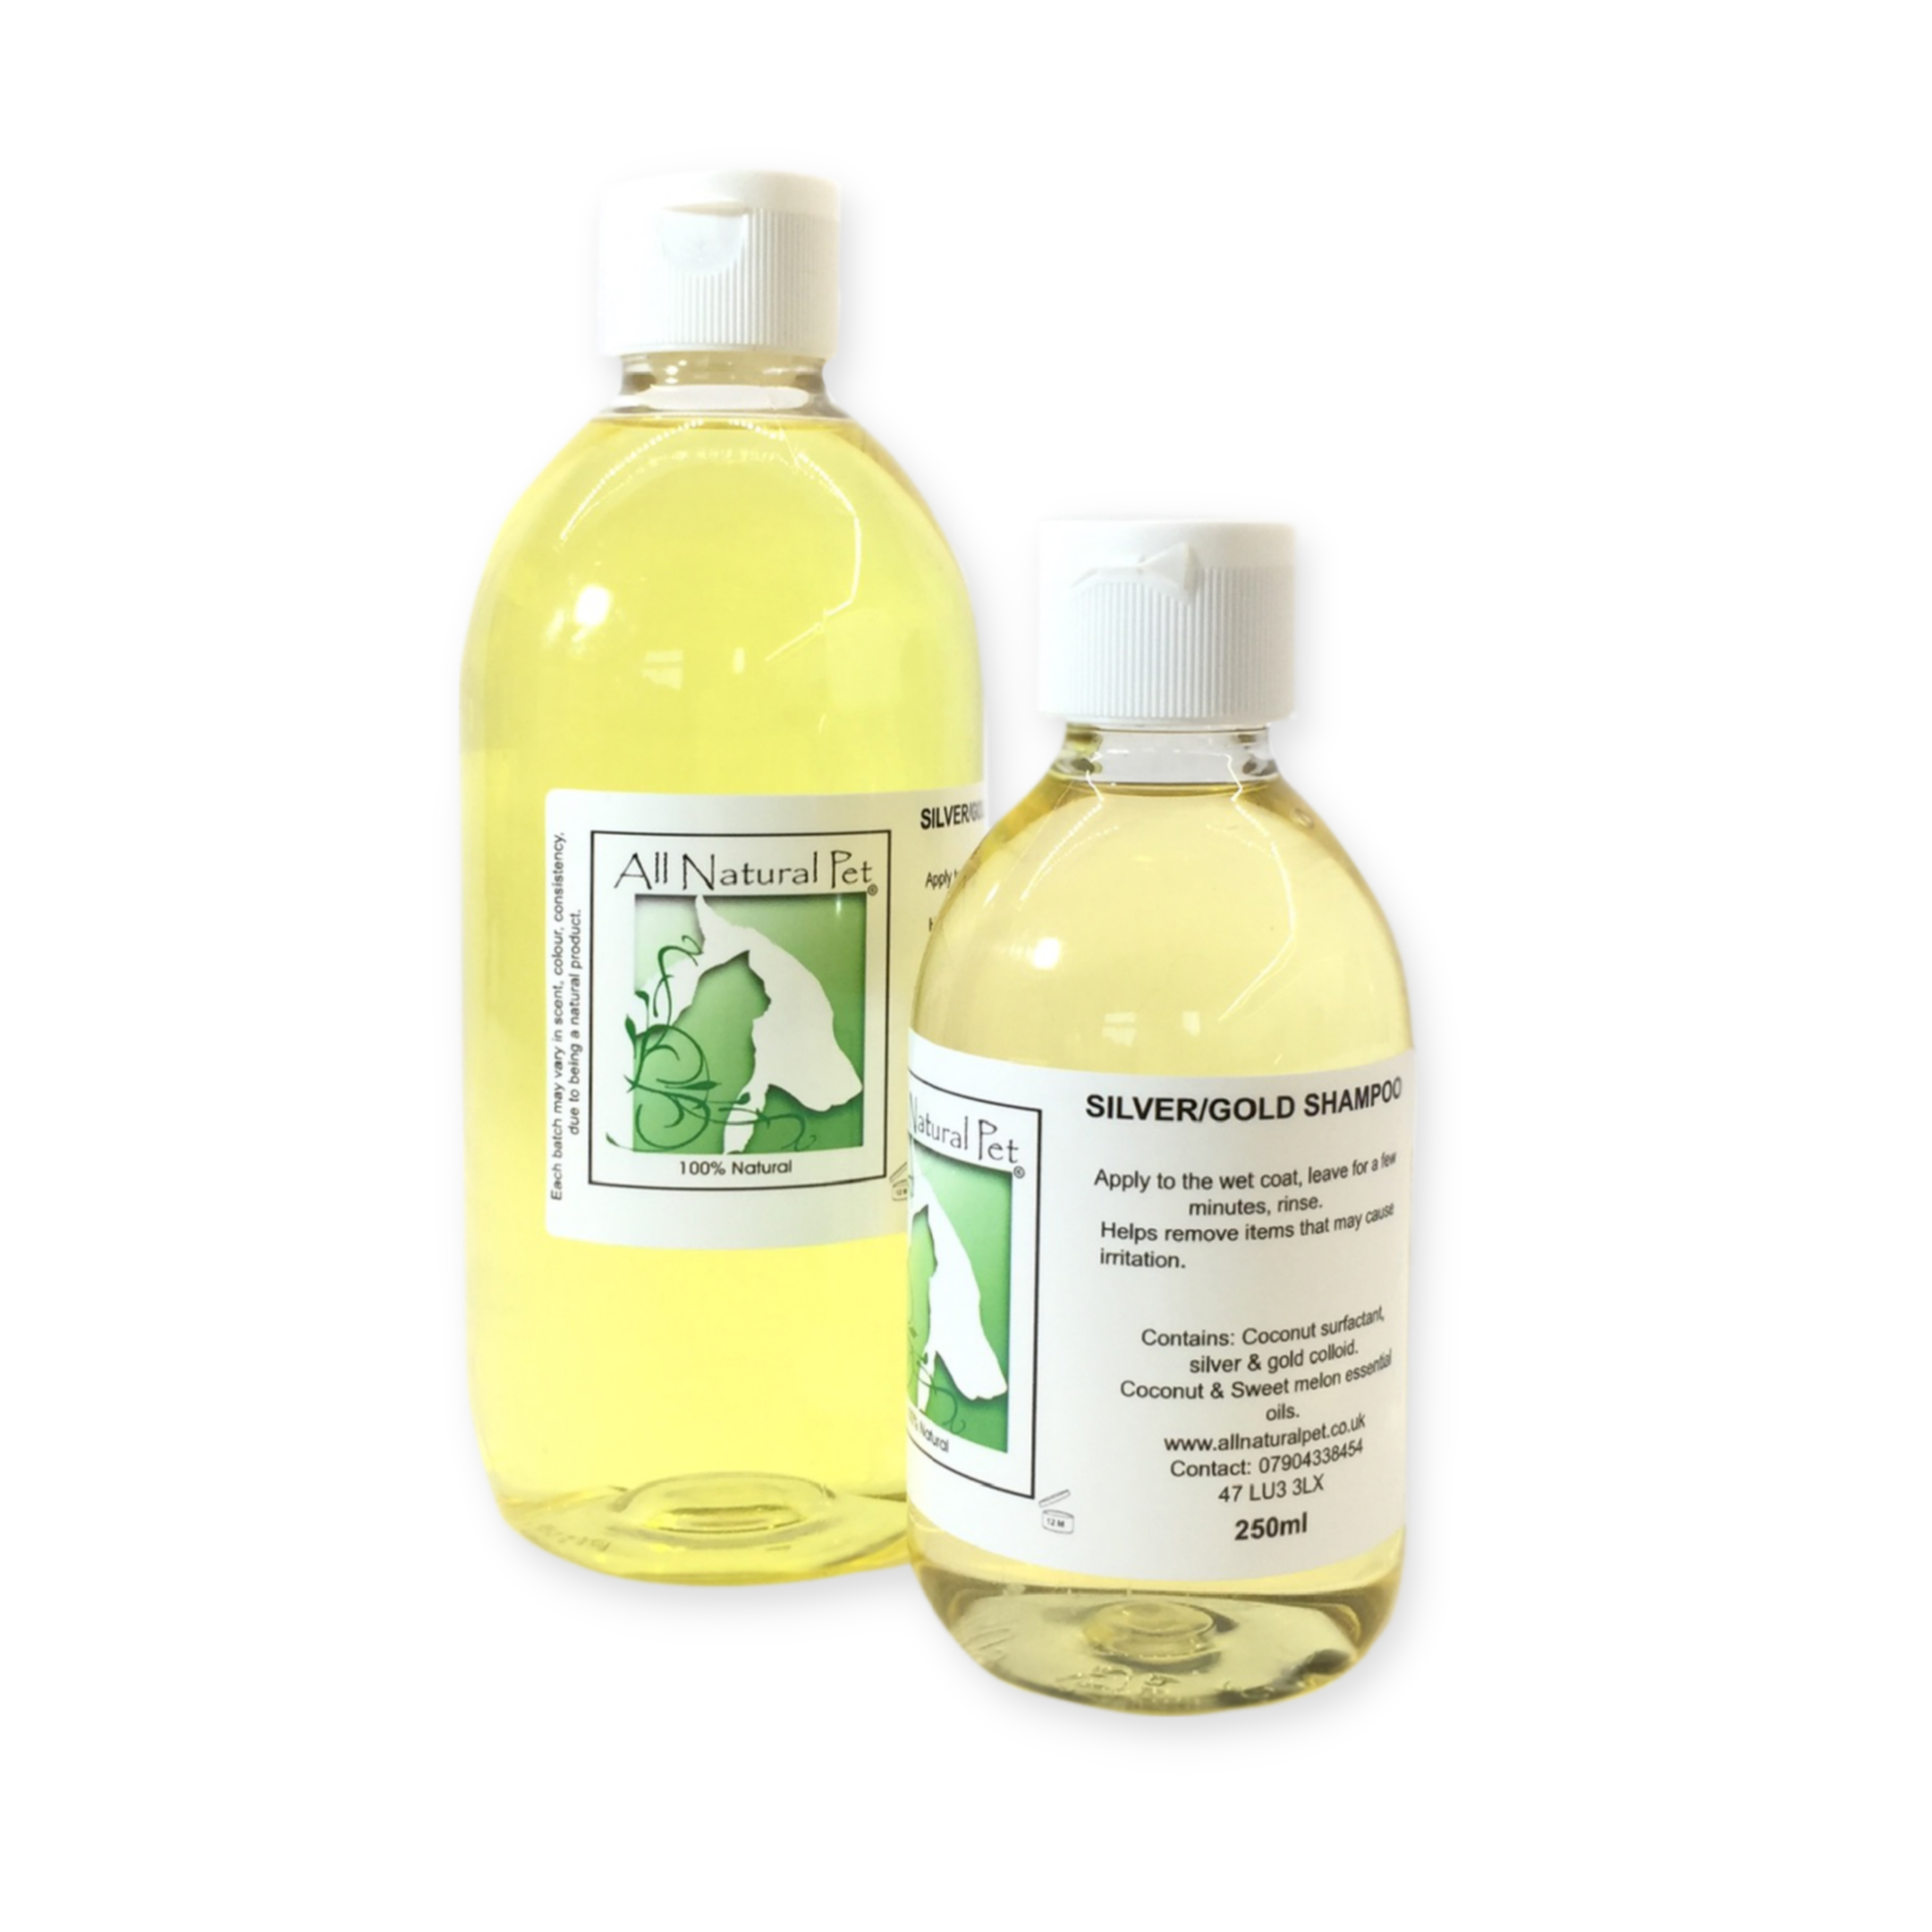 A clear bottle with a white flip lid containing a nicely scented golden coloured natural shampoo for pets with allergy's